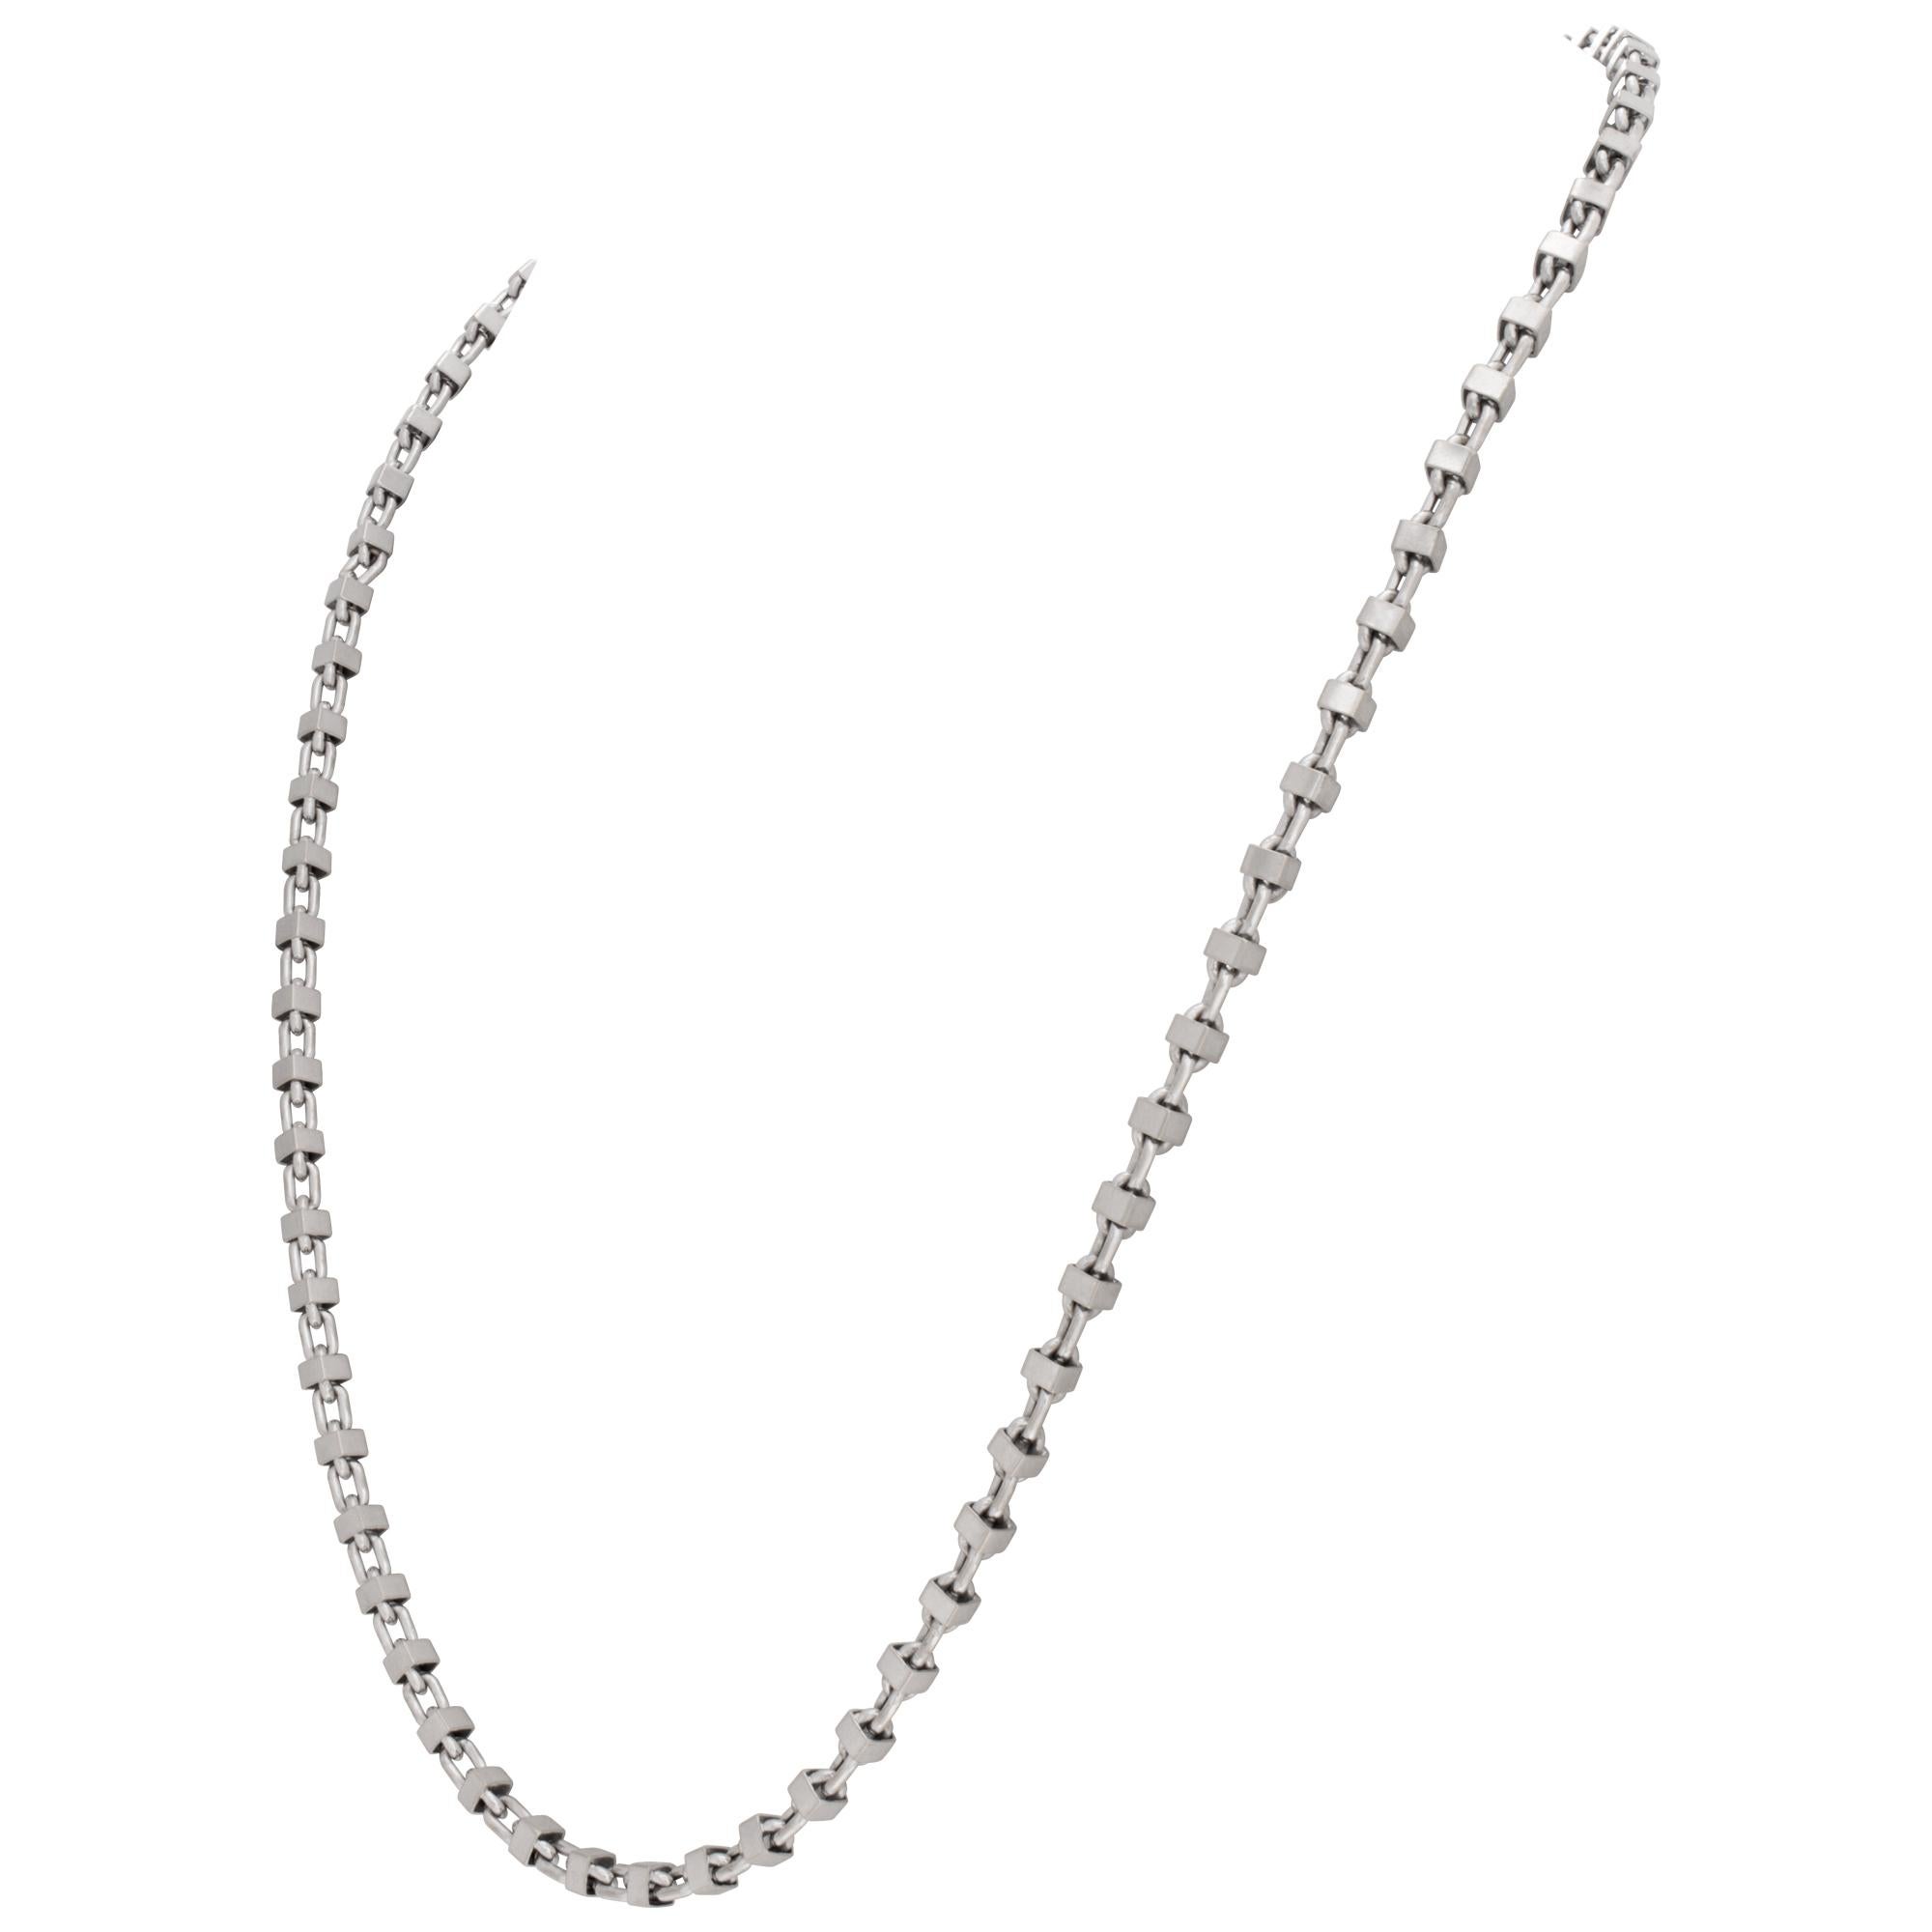 Cube link 18k white gold chain necklace. Width 3.8 mm. Length 26 inches. Made in France.
